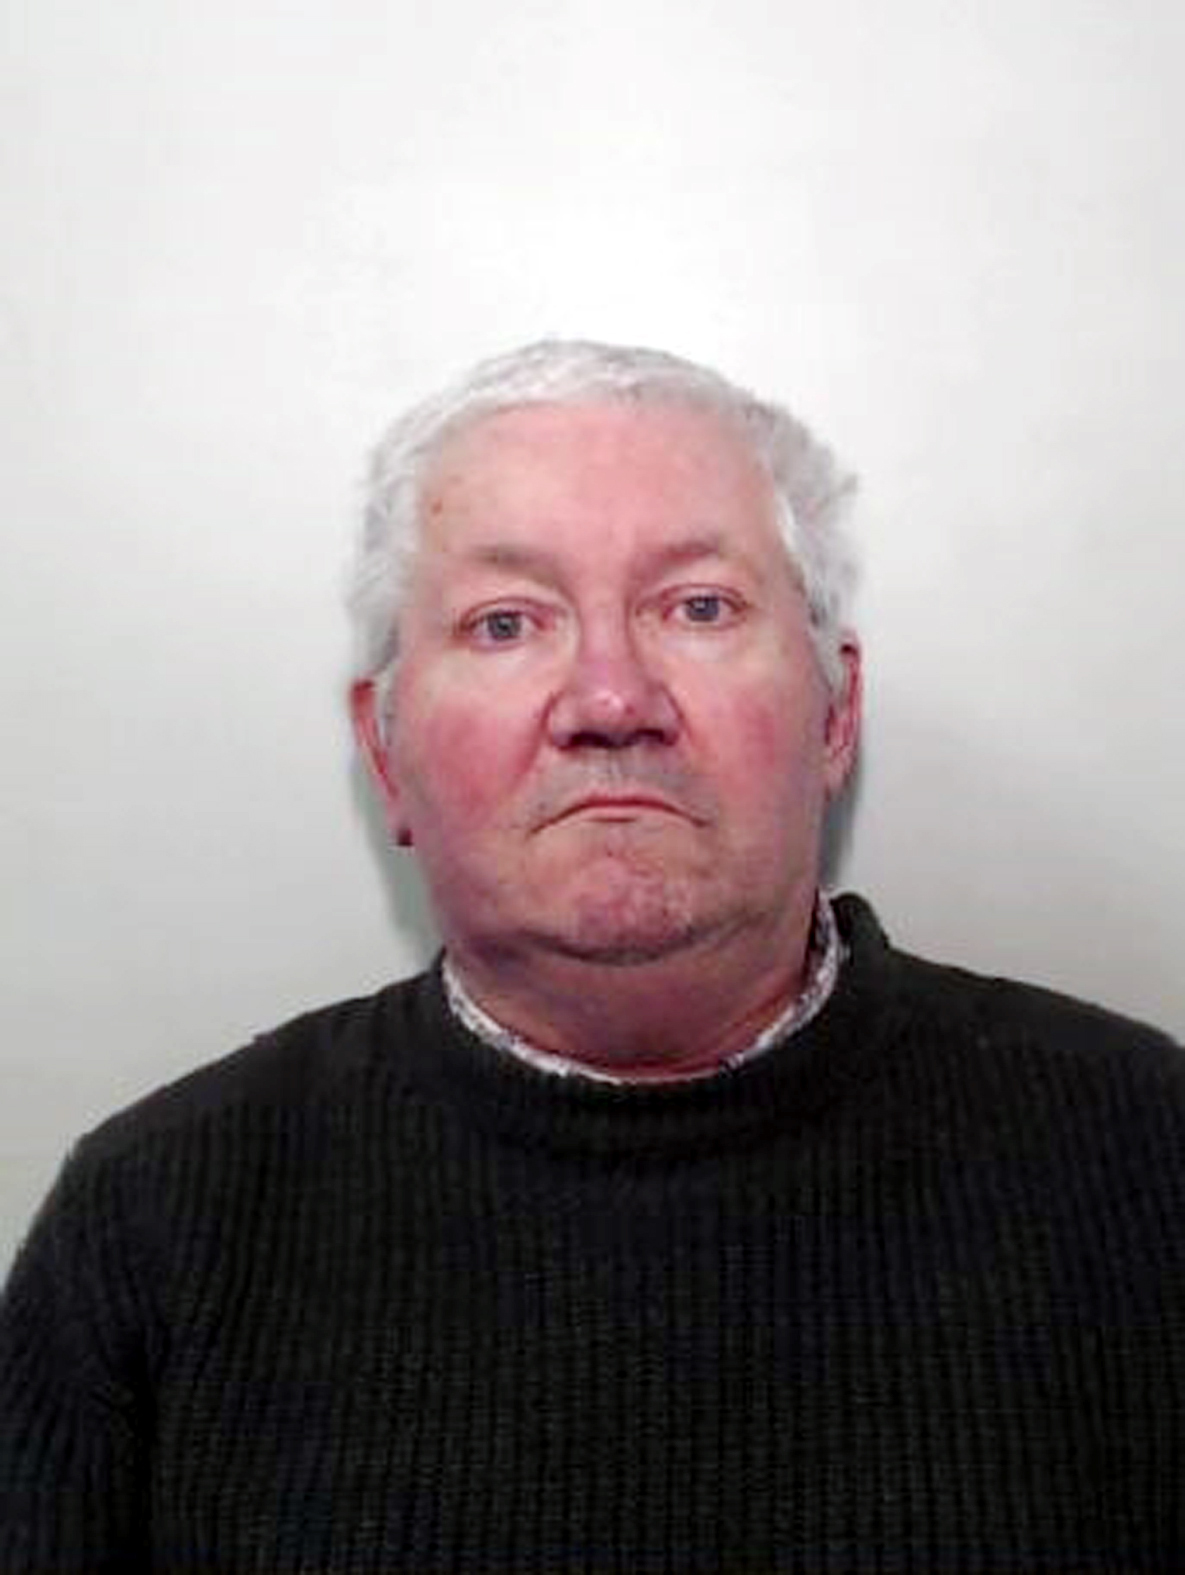 Former Scout master serving 5 years for abusing Cub Scouts has sentence extended